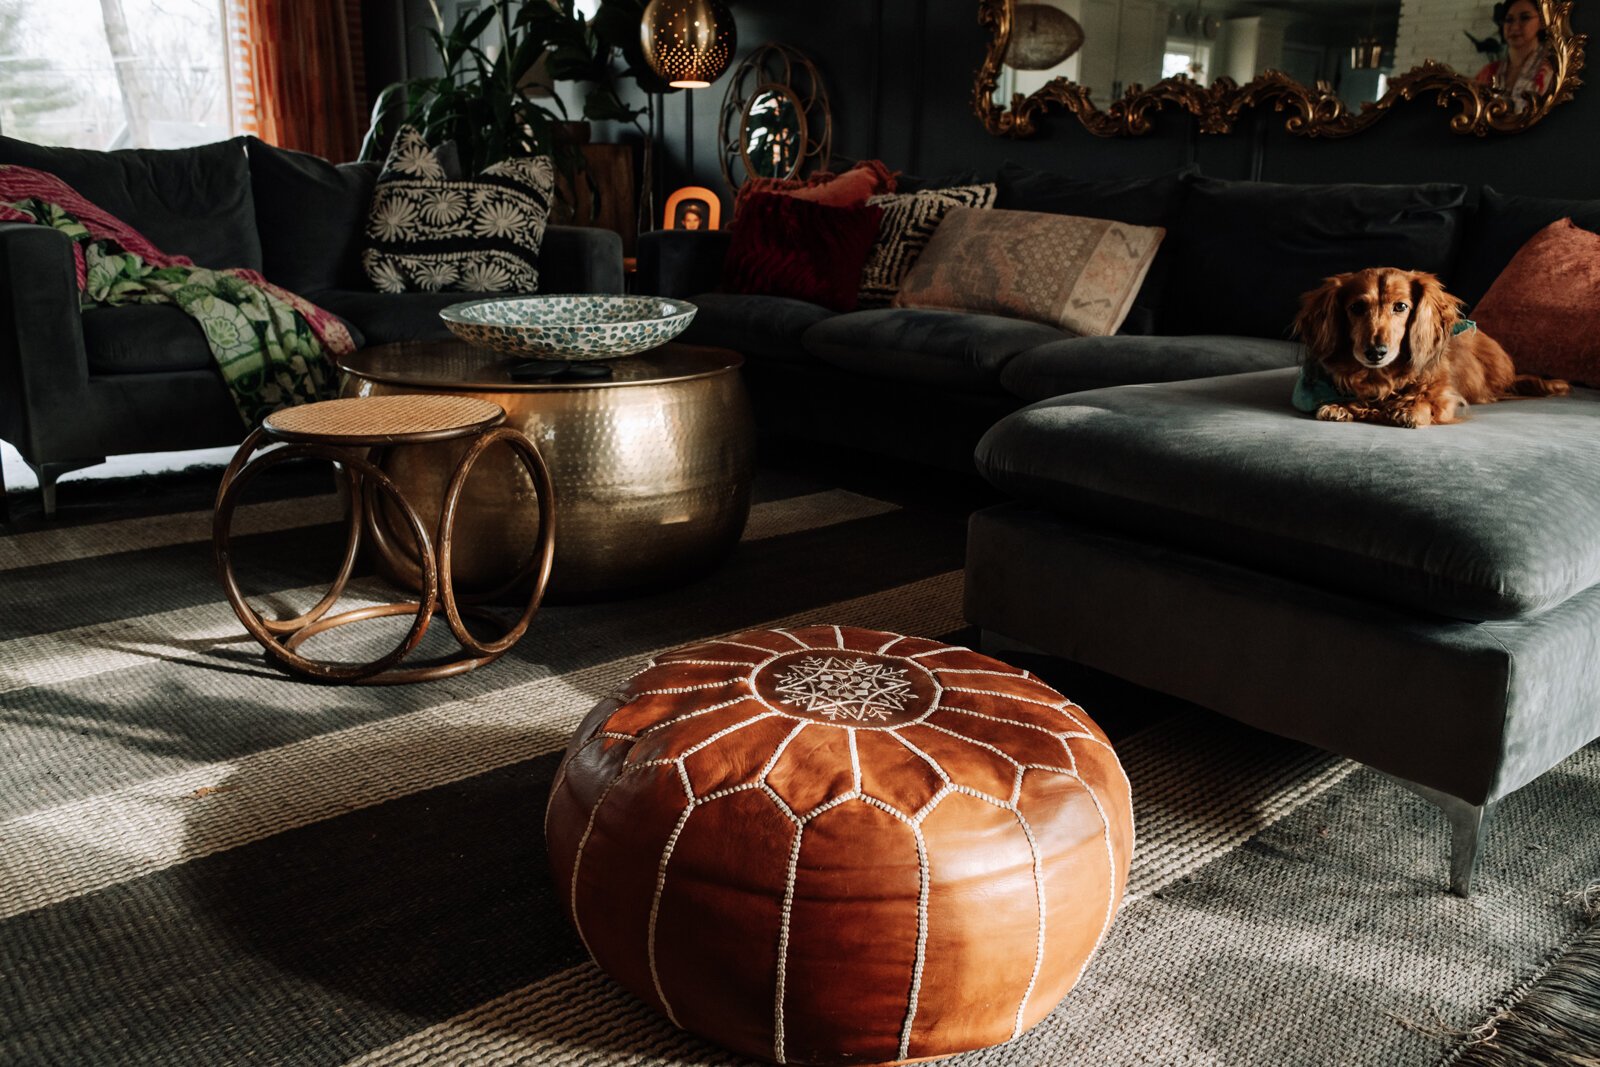 A Moroccan poof in the living room was a gift from Alexa's mom.